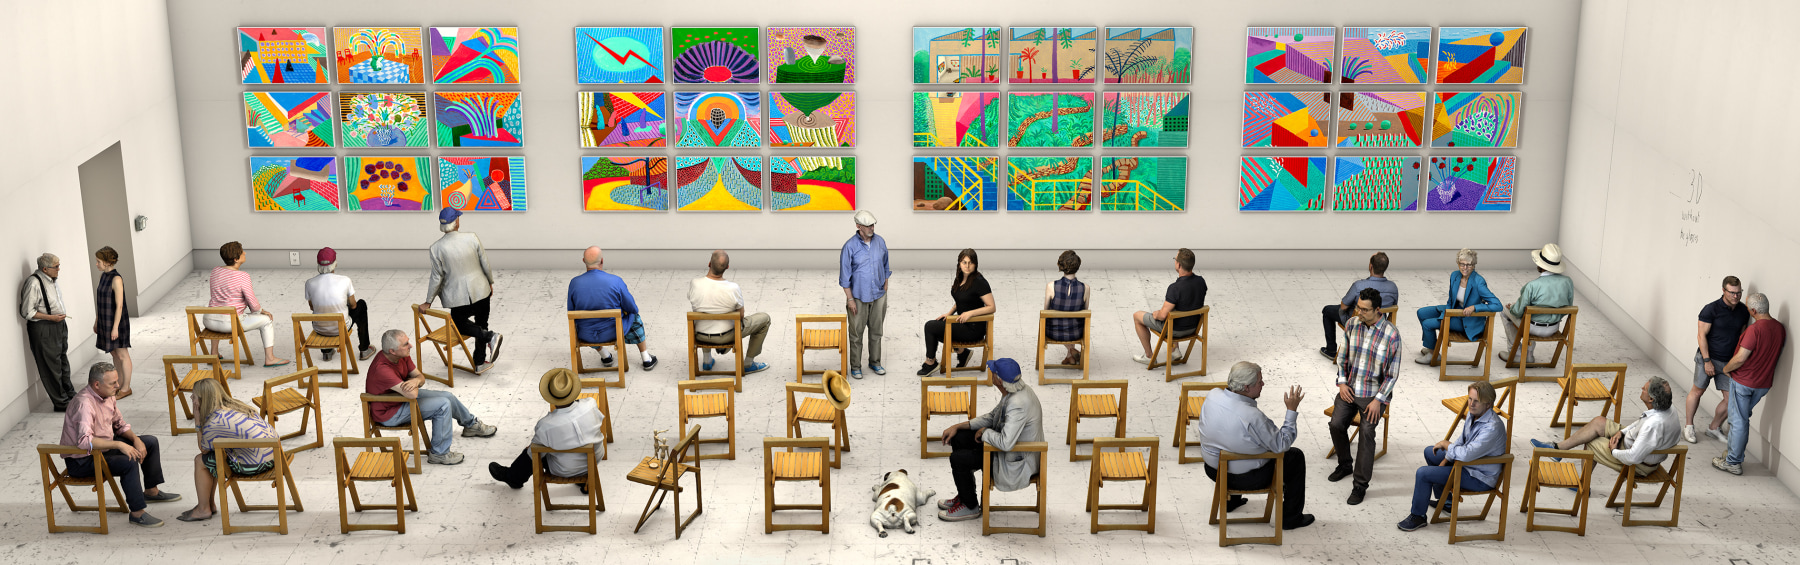 David Hockney (b. 1937)
Pictures at an Exhibition, 2018
Photographic drawing printed on 8 sheets of paper,
mounted on 8 sheets of Dibond
8 feet 11 1/2 inches x 28 feet 8 inches (2.7 x 8.7 m)
Edition of 12